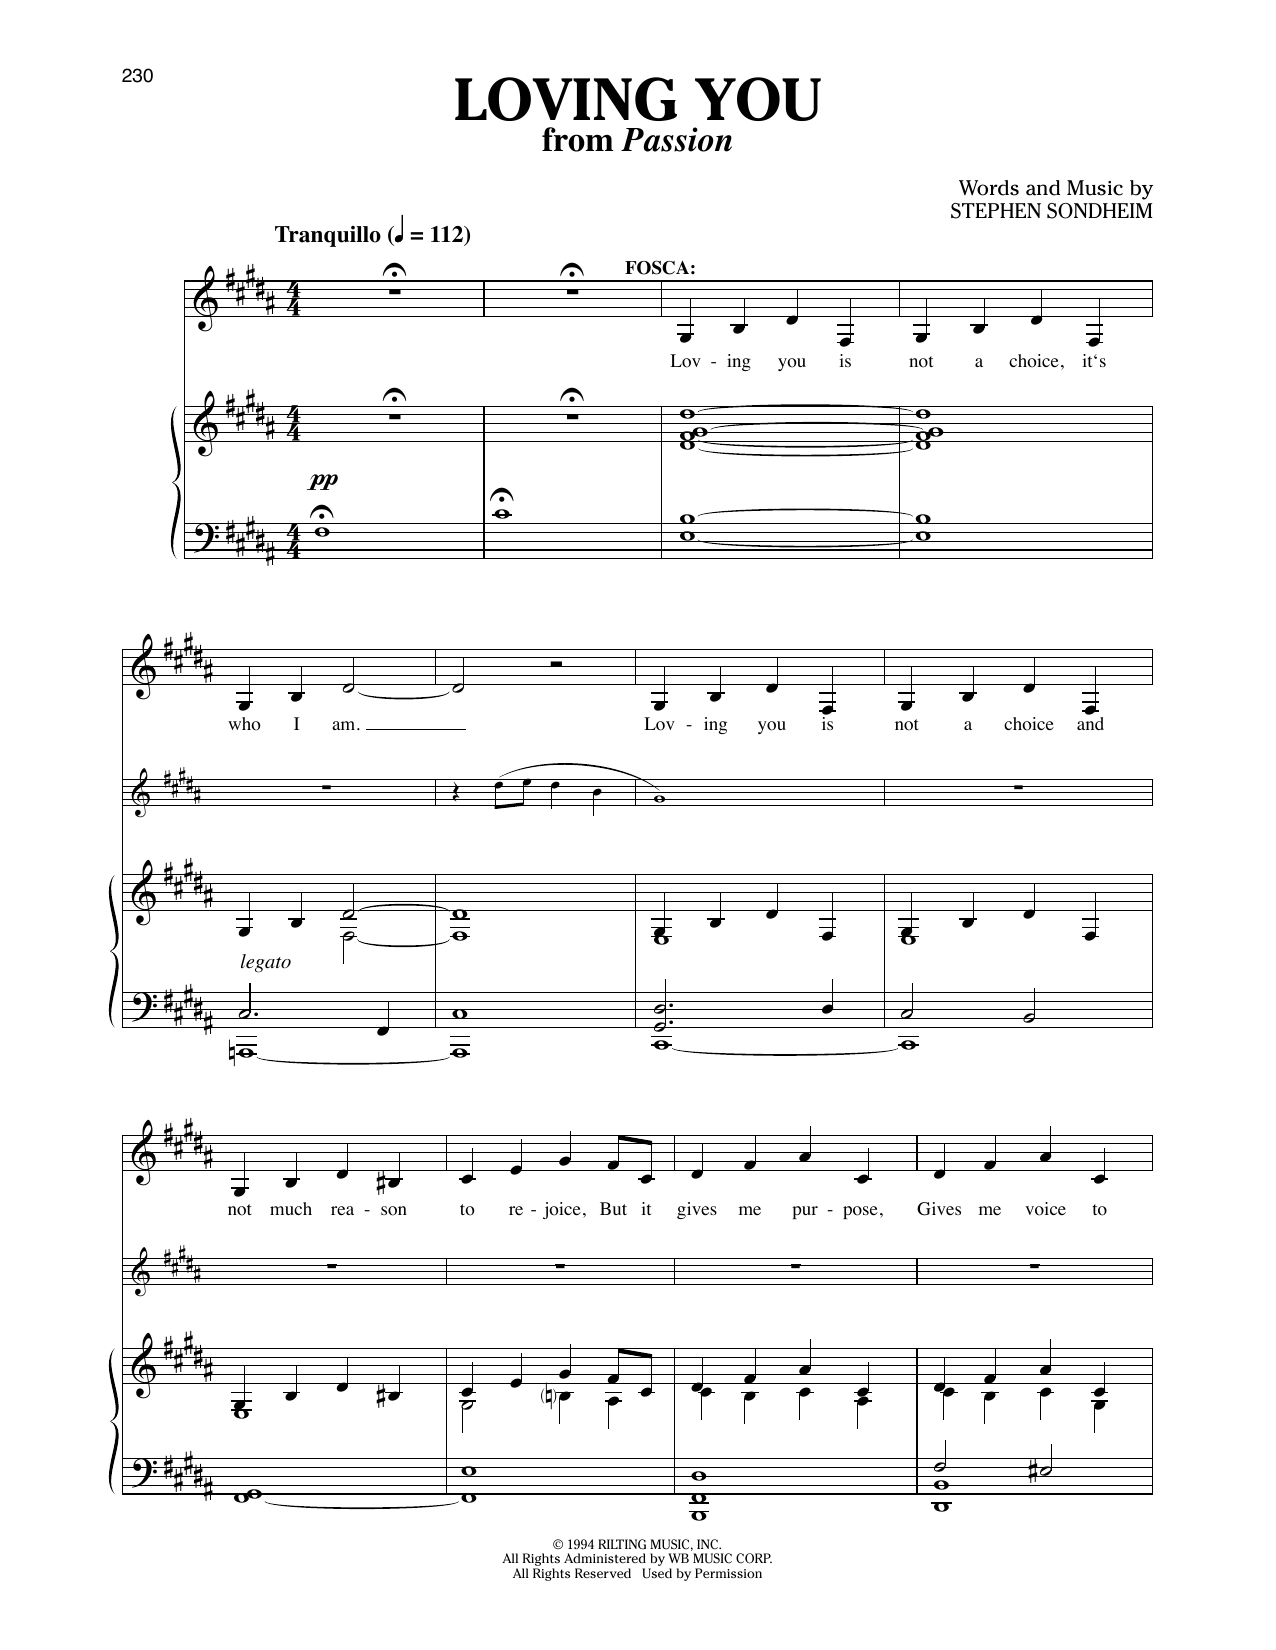 Download Stephen Sondheim Loving You (from Passion) Sheet Music